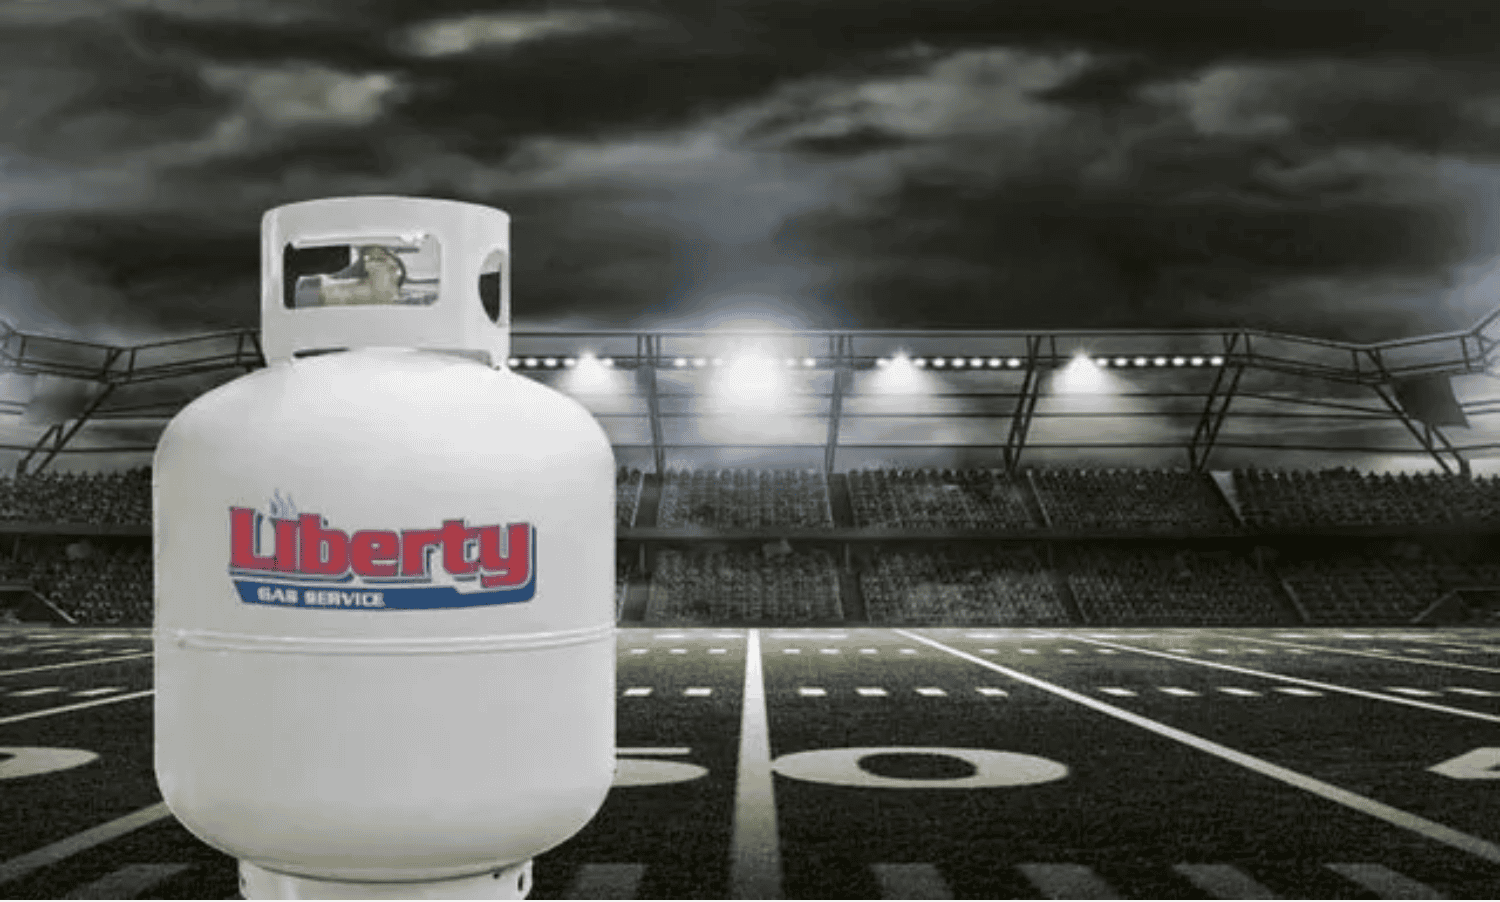 propane tank and football field graphic with liberty gas logo.